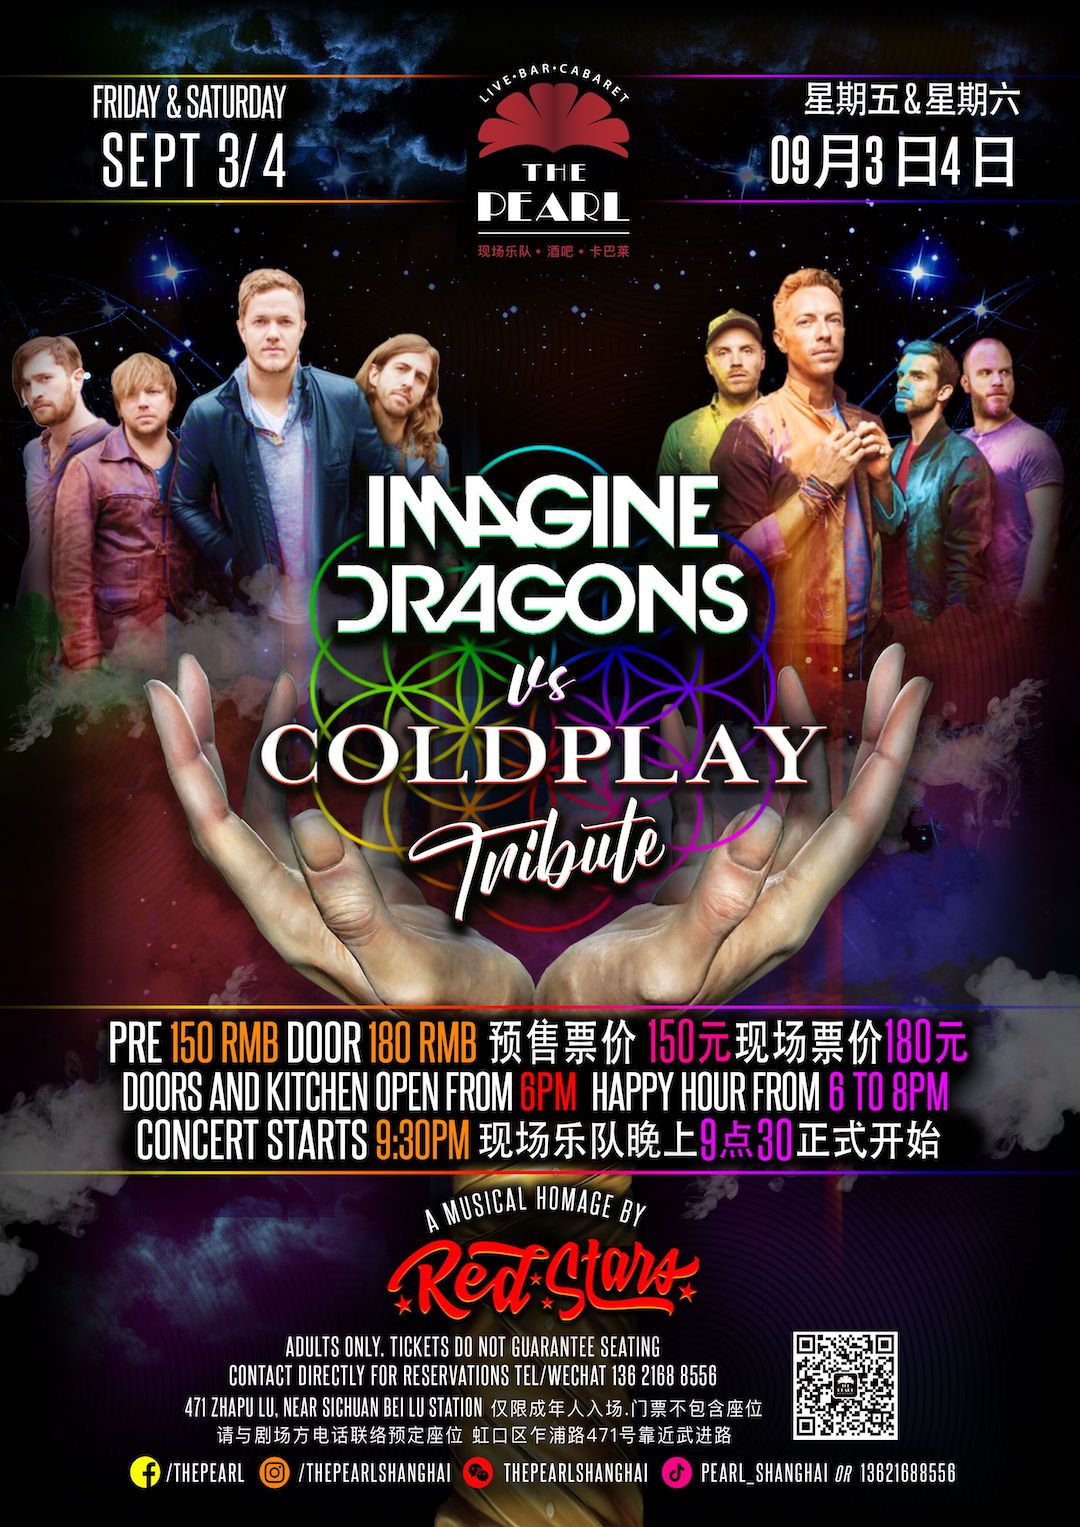 Buy Tickets for Imagine Dragons & Coldplay Tribute in Shanghai